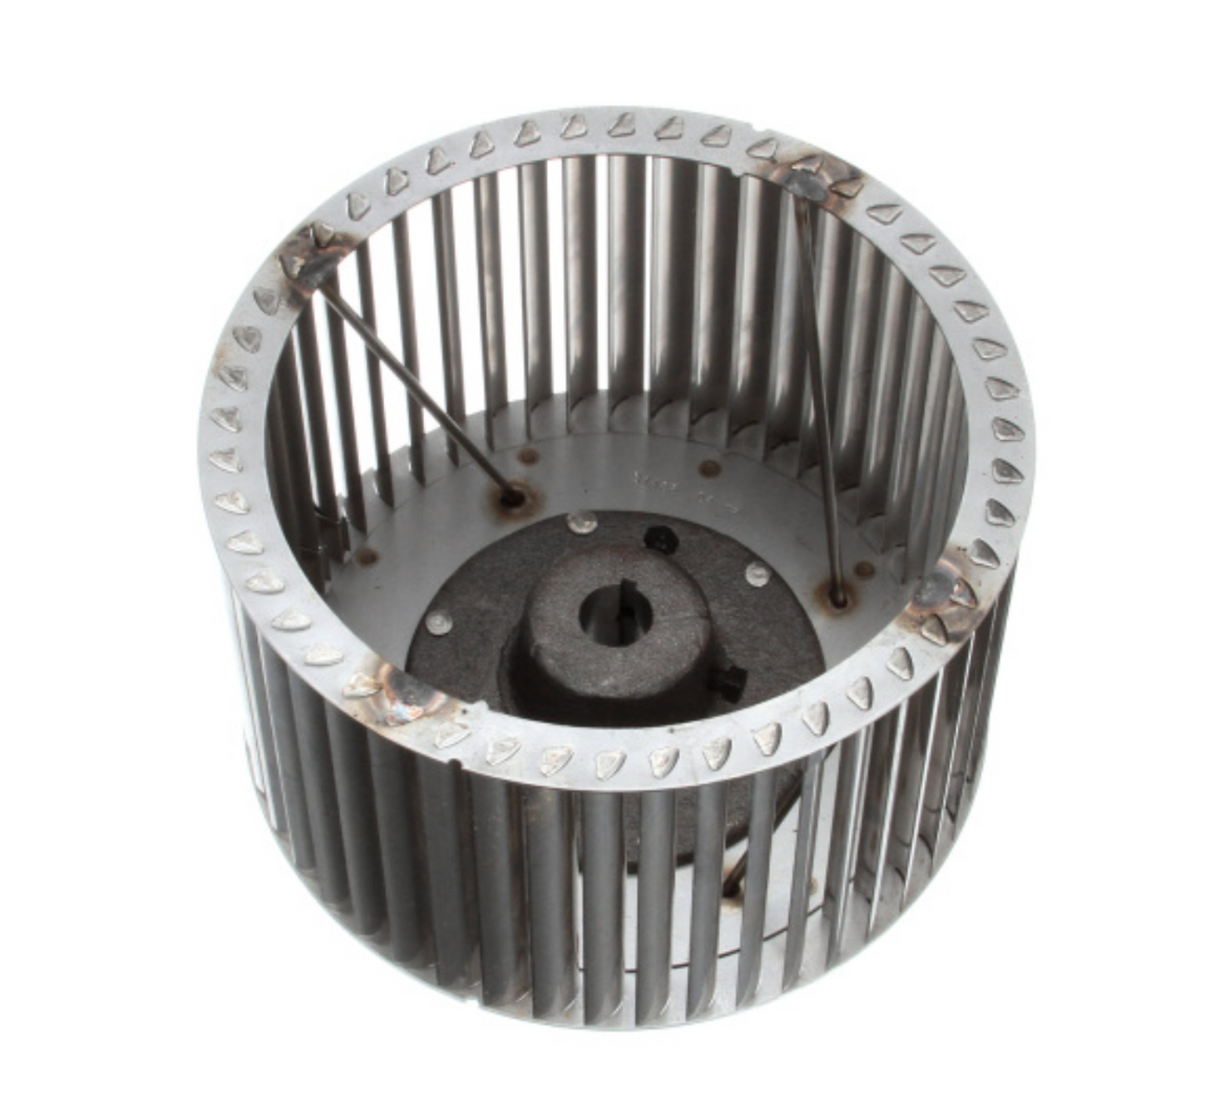 Middleby 31485 Blower Wheel - Clockwise Rotation